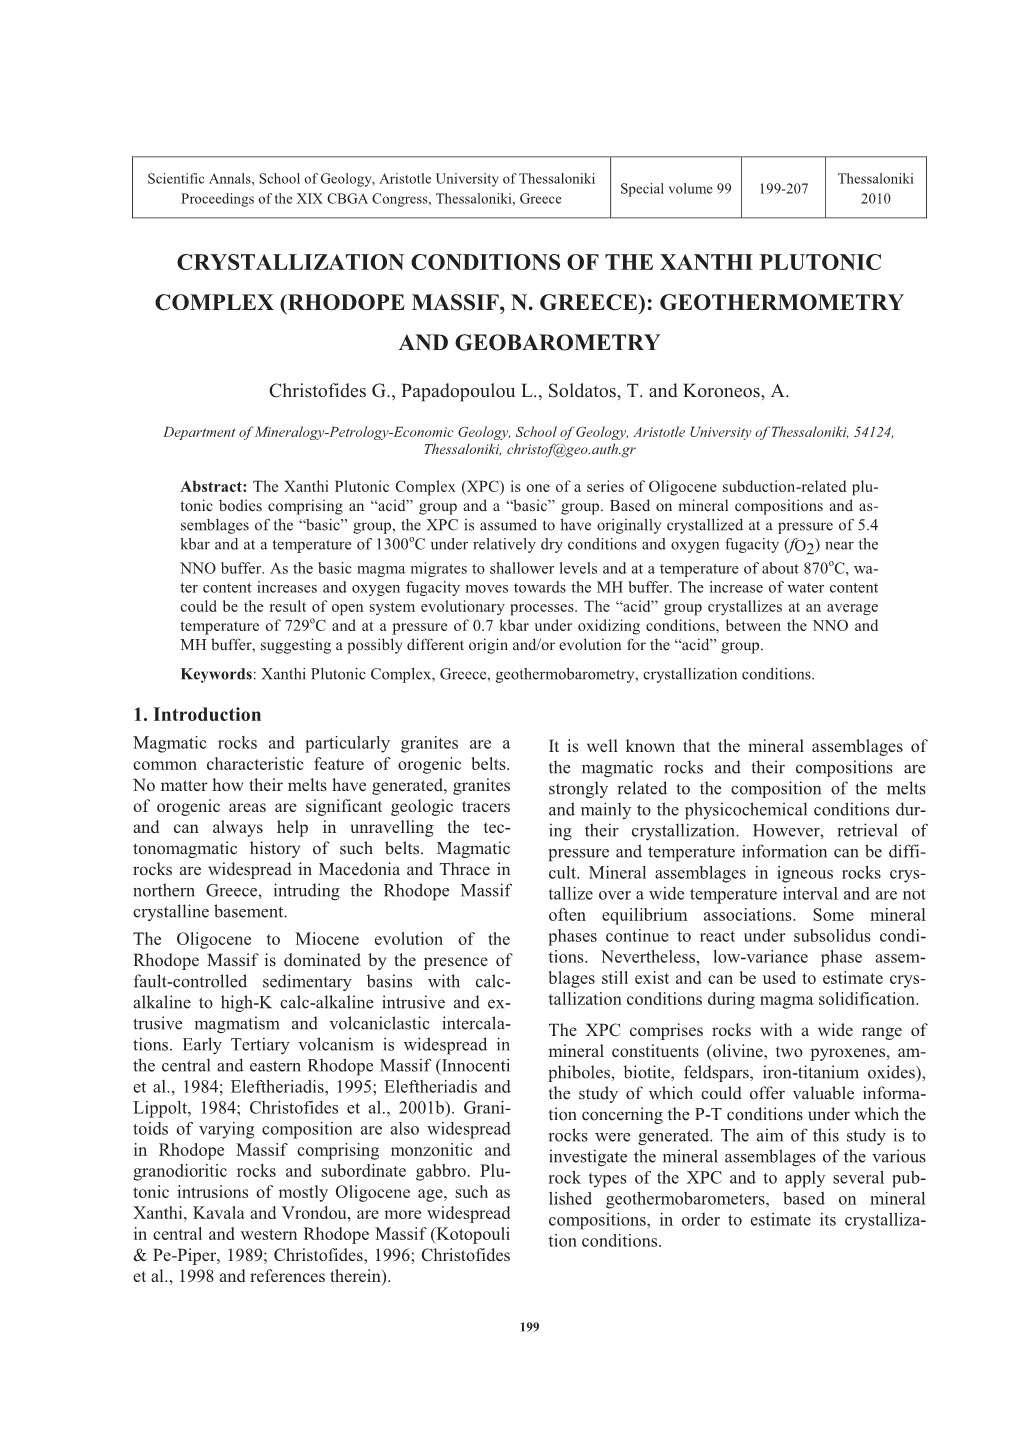 Crystallization Conditions of the Xanthi Plutonic Complex (Rhodope Massif, N